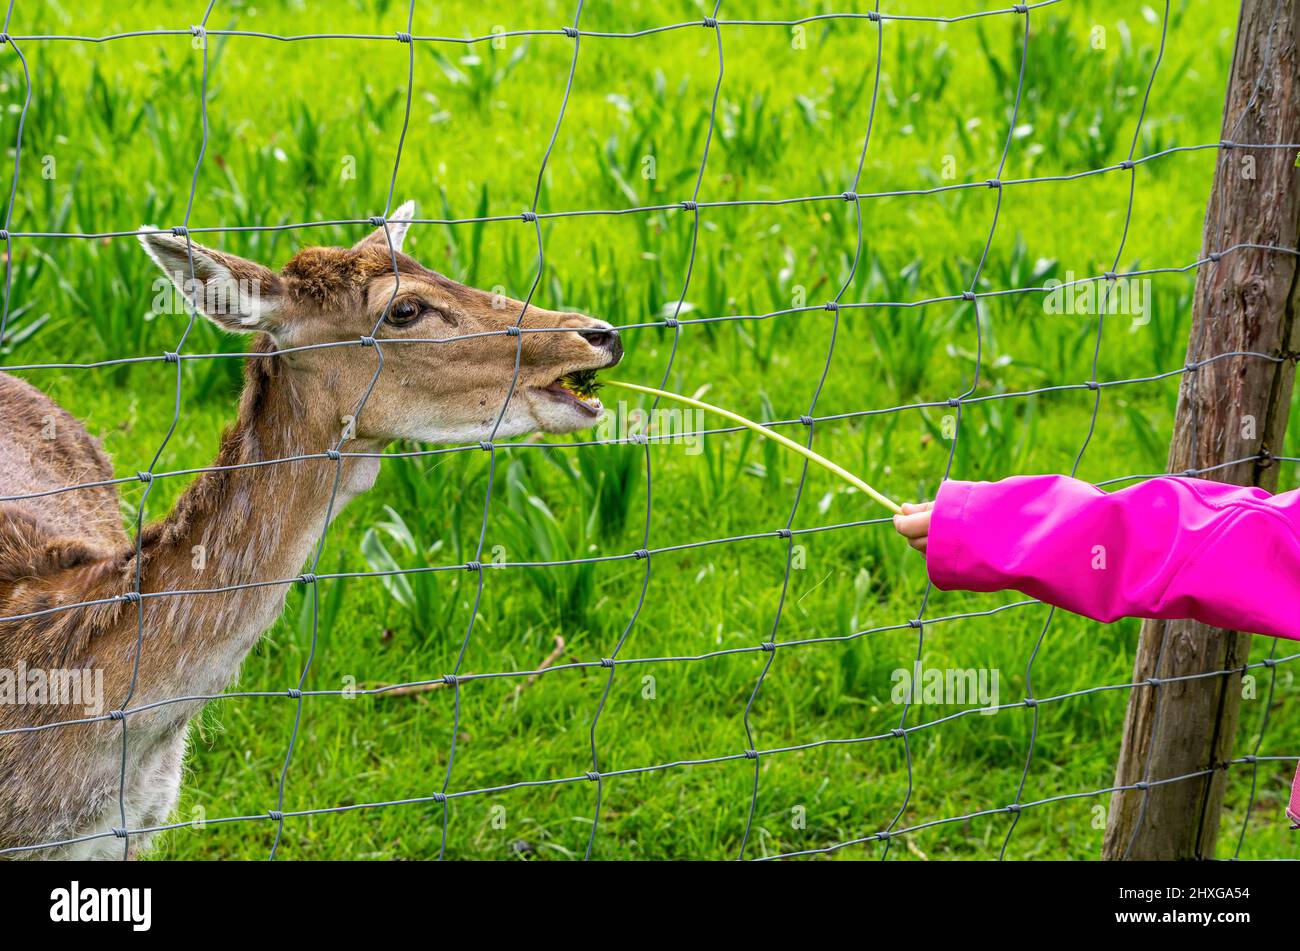 A female specimen of red deer is fed dandelions by a child's hand through a wire mesh fence. Stock Photo